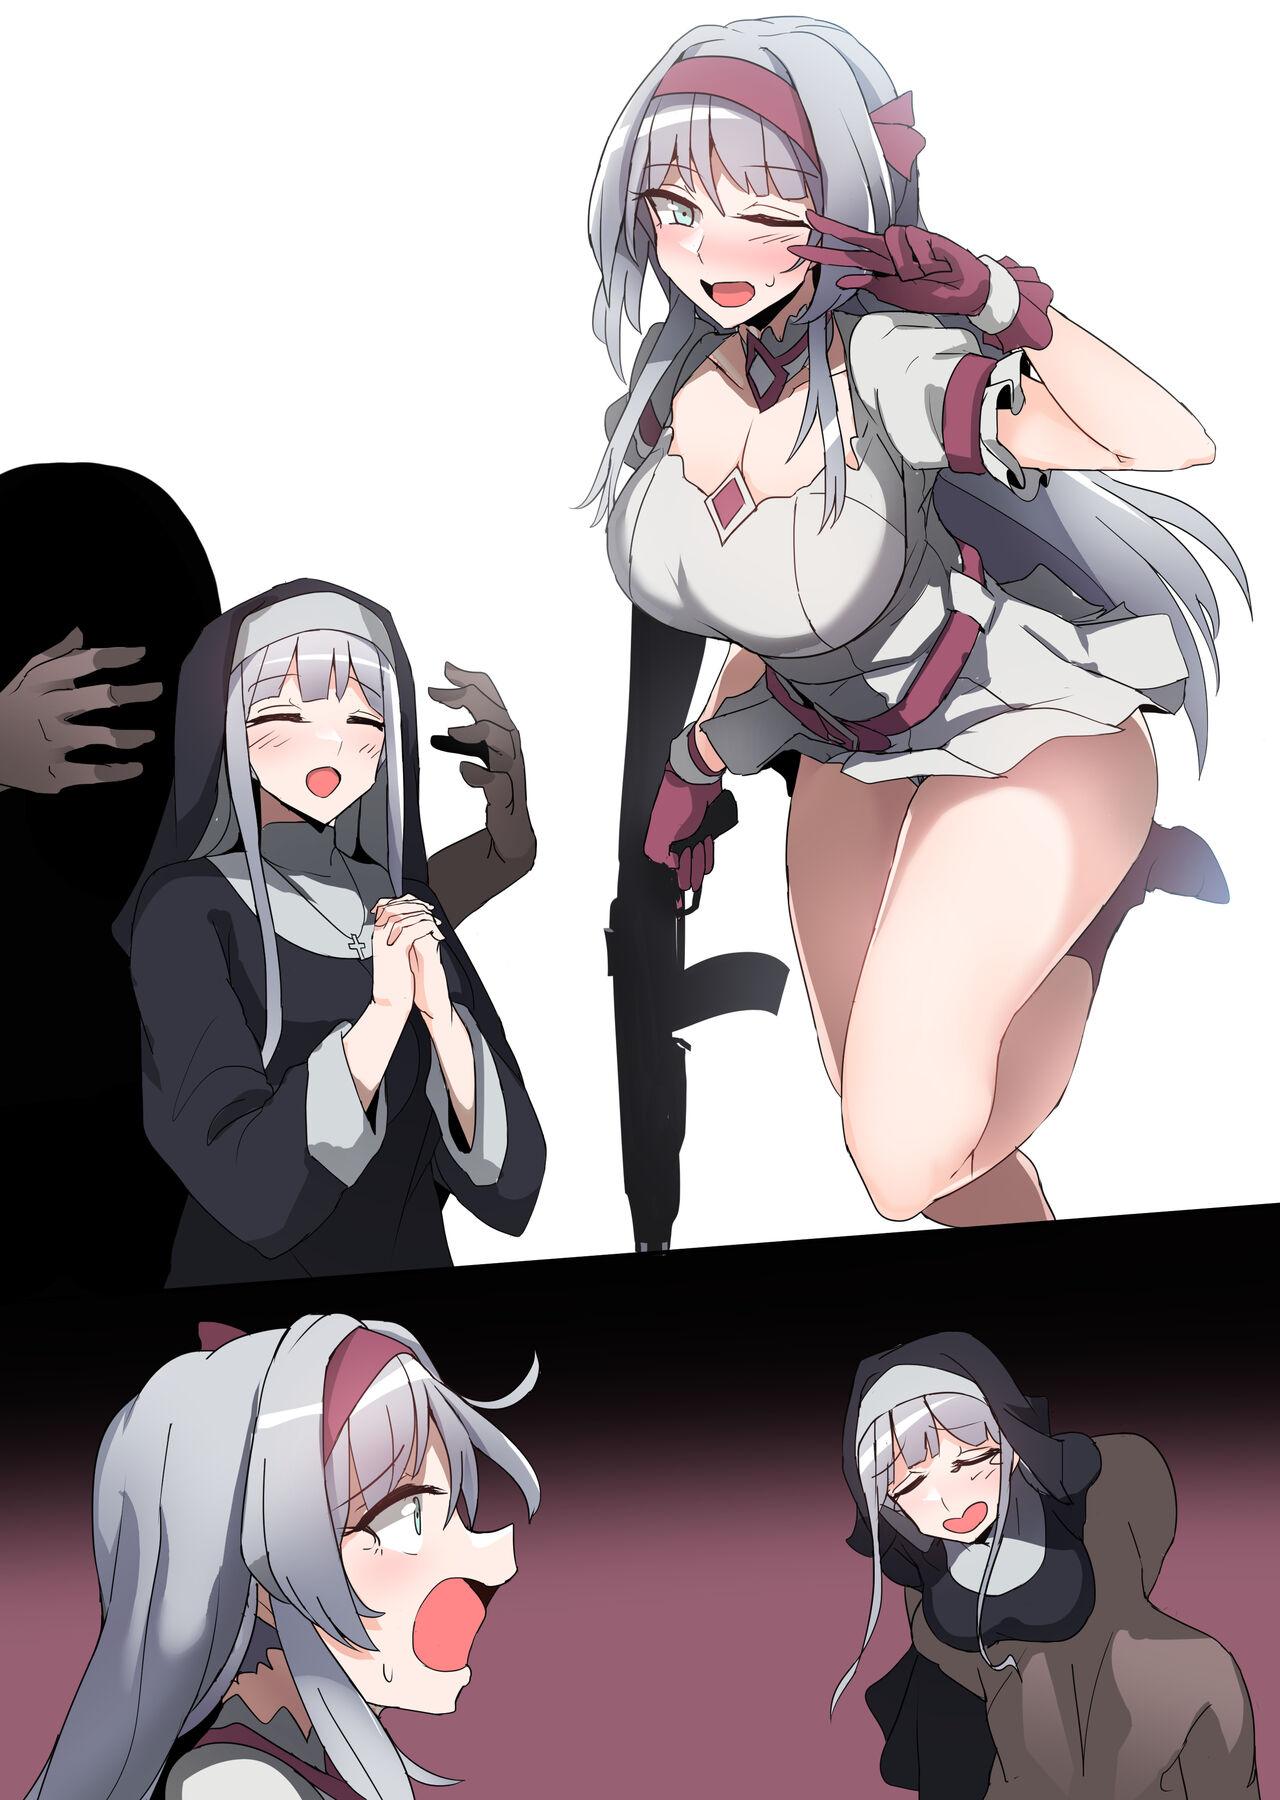 Asians To Be Continued.... - Girls frontline Barely 18 Porn - Page 1